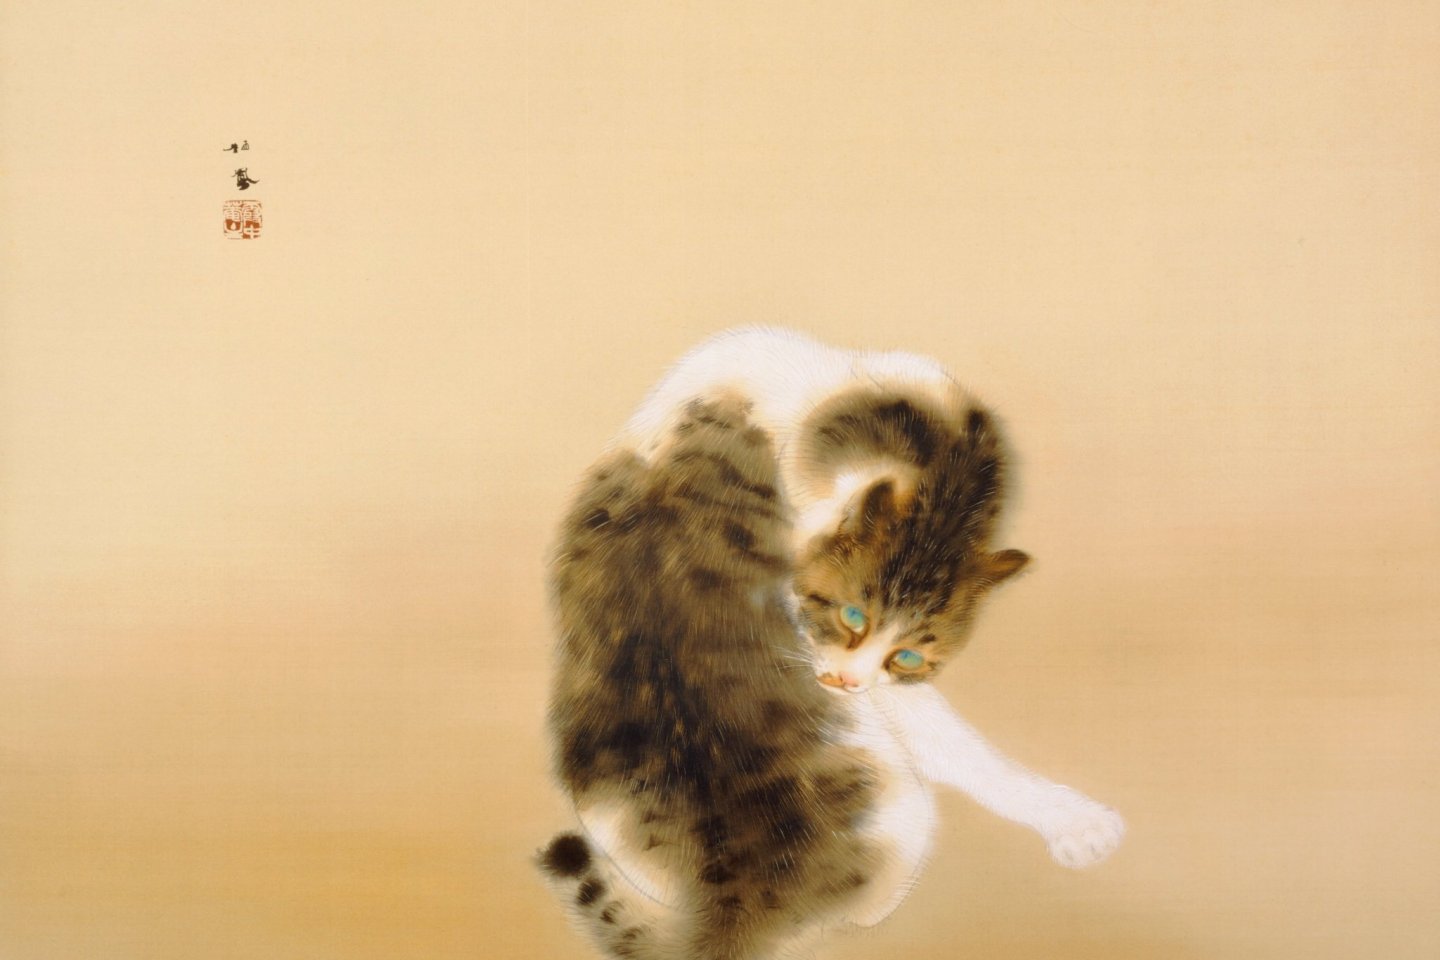 Tabby Cat - One of Takeuchi Seiho\'s iconic works